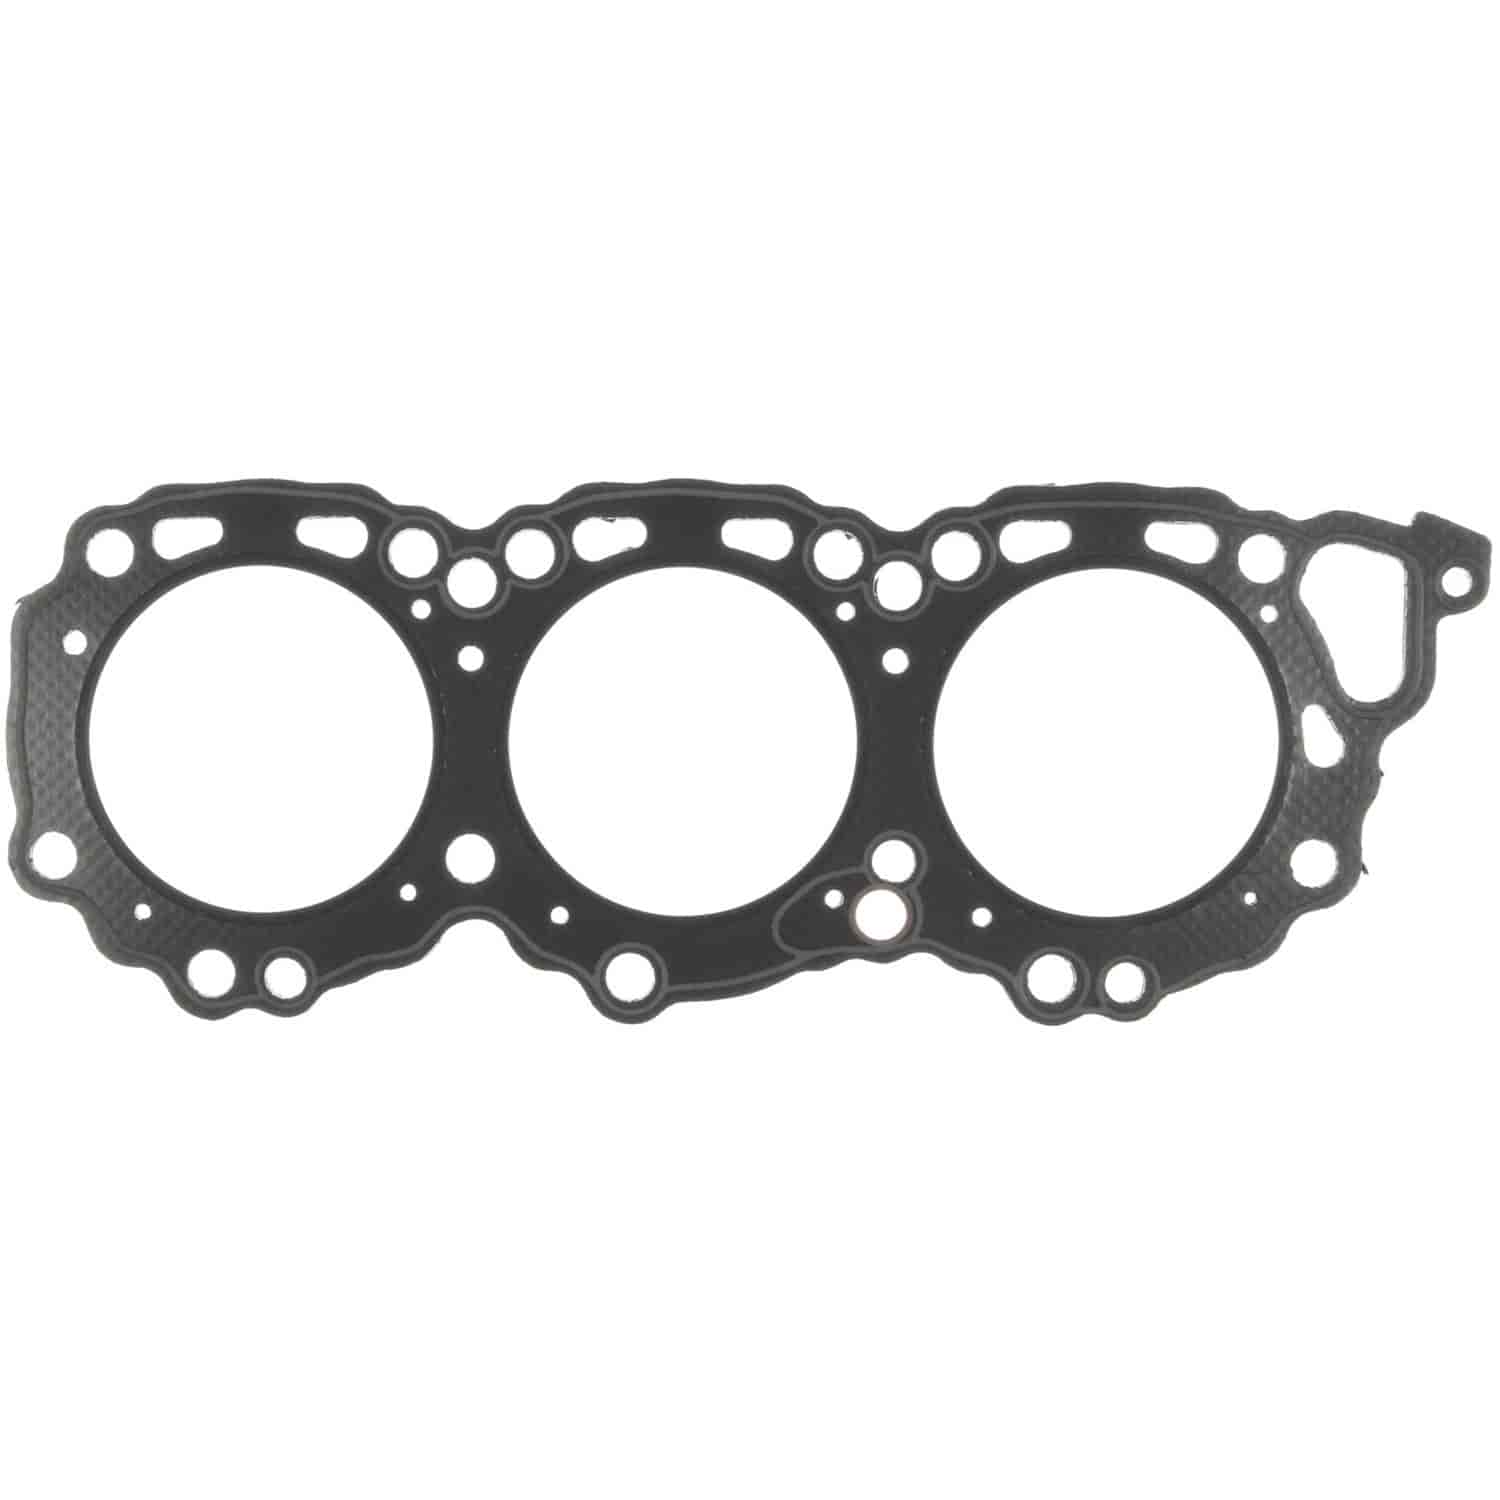 Cylinder Head Gasket for Infinity for Nissan 200SX 300ZX 300ZX Turbo Pickup Pathfinder w/2960cc VG30E